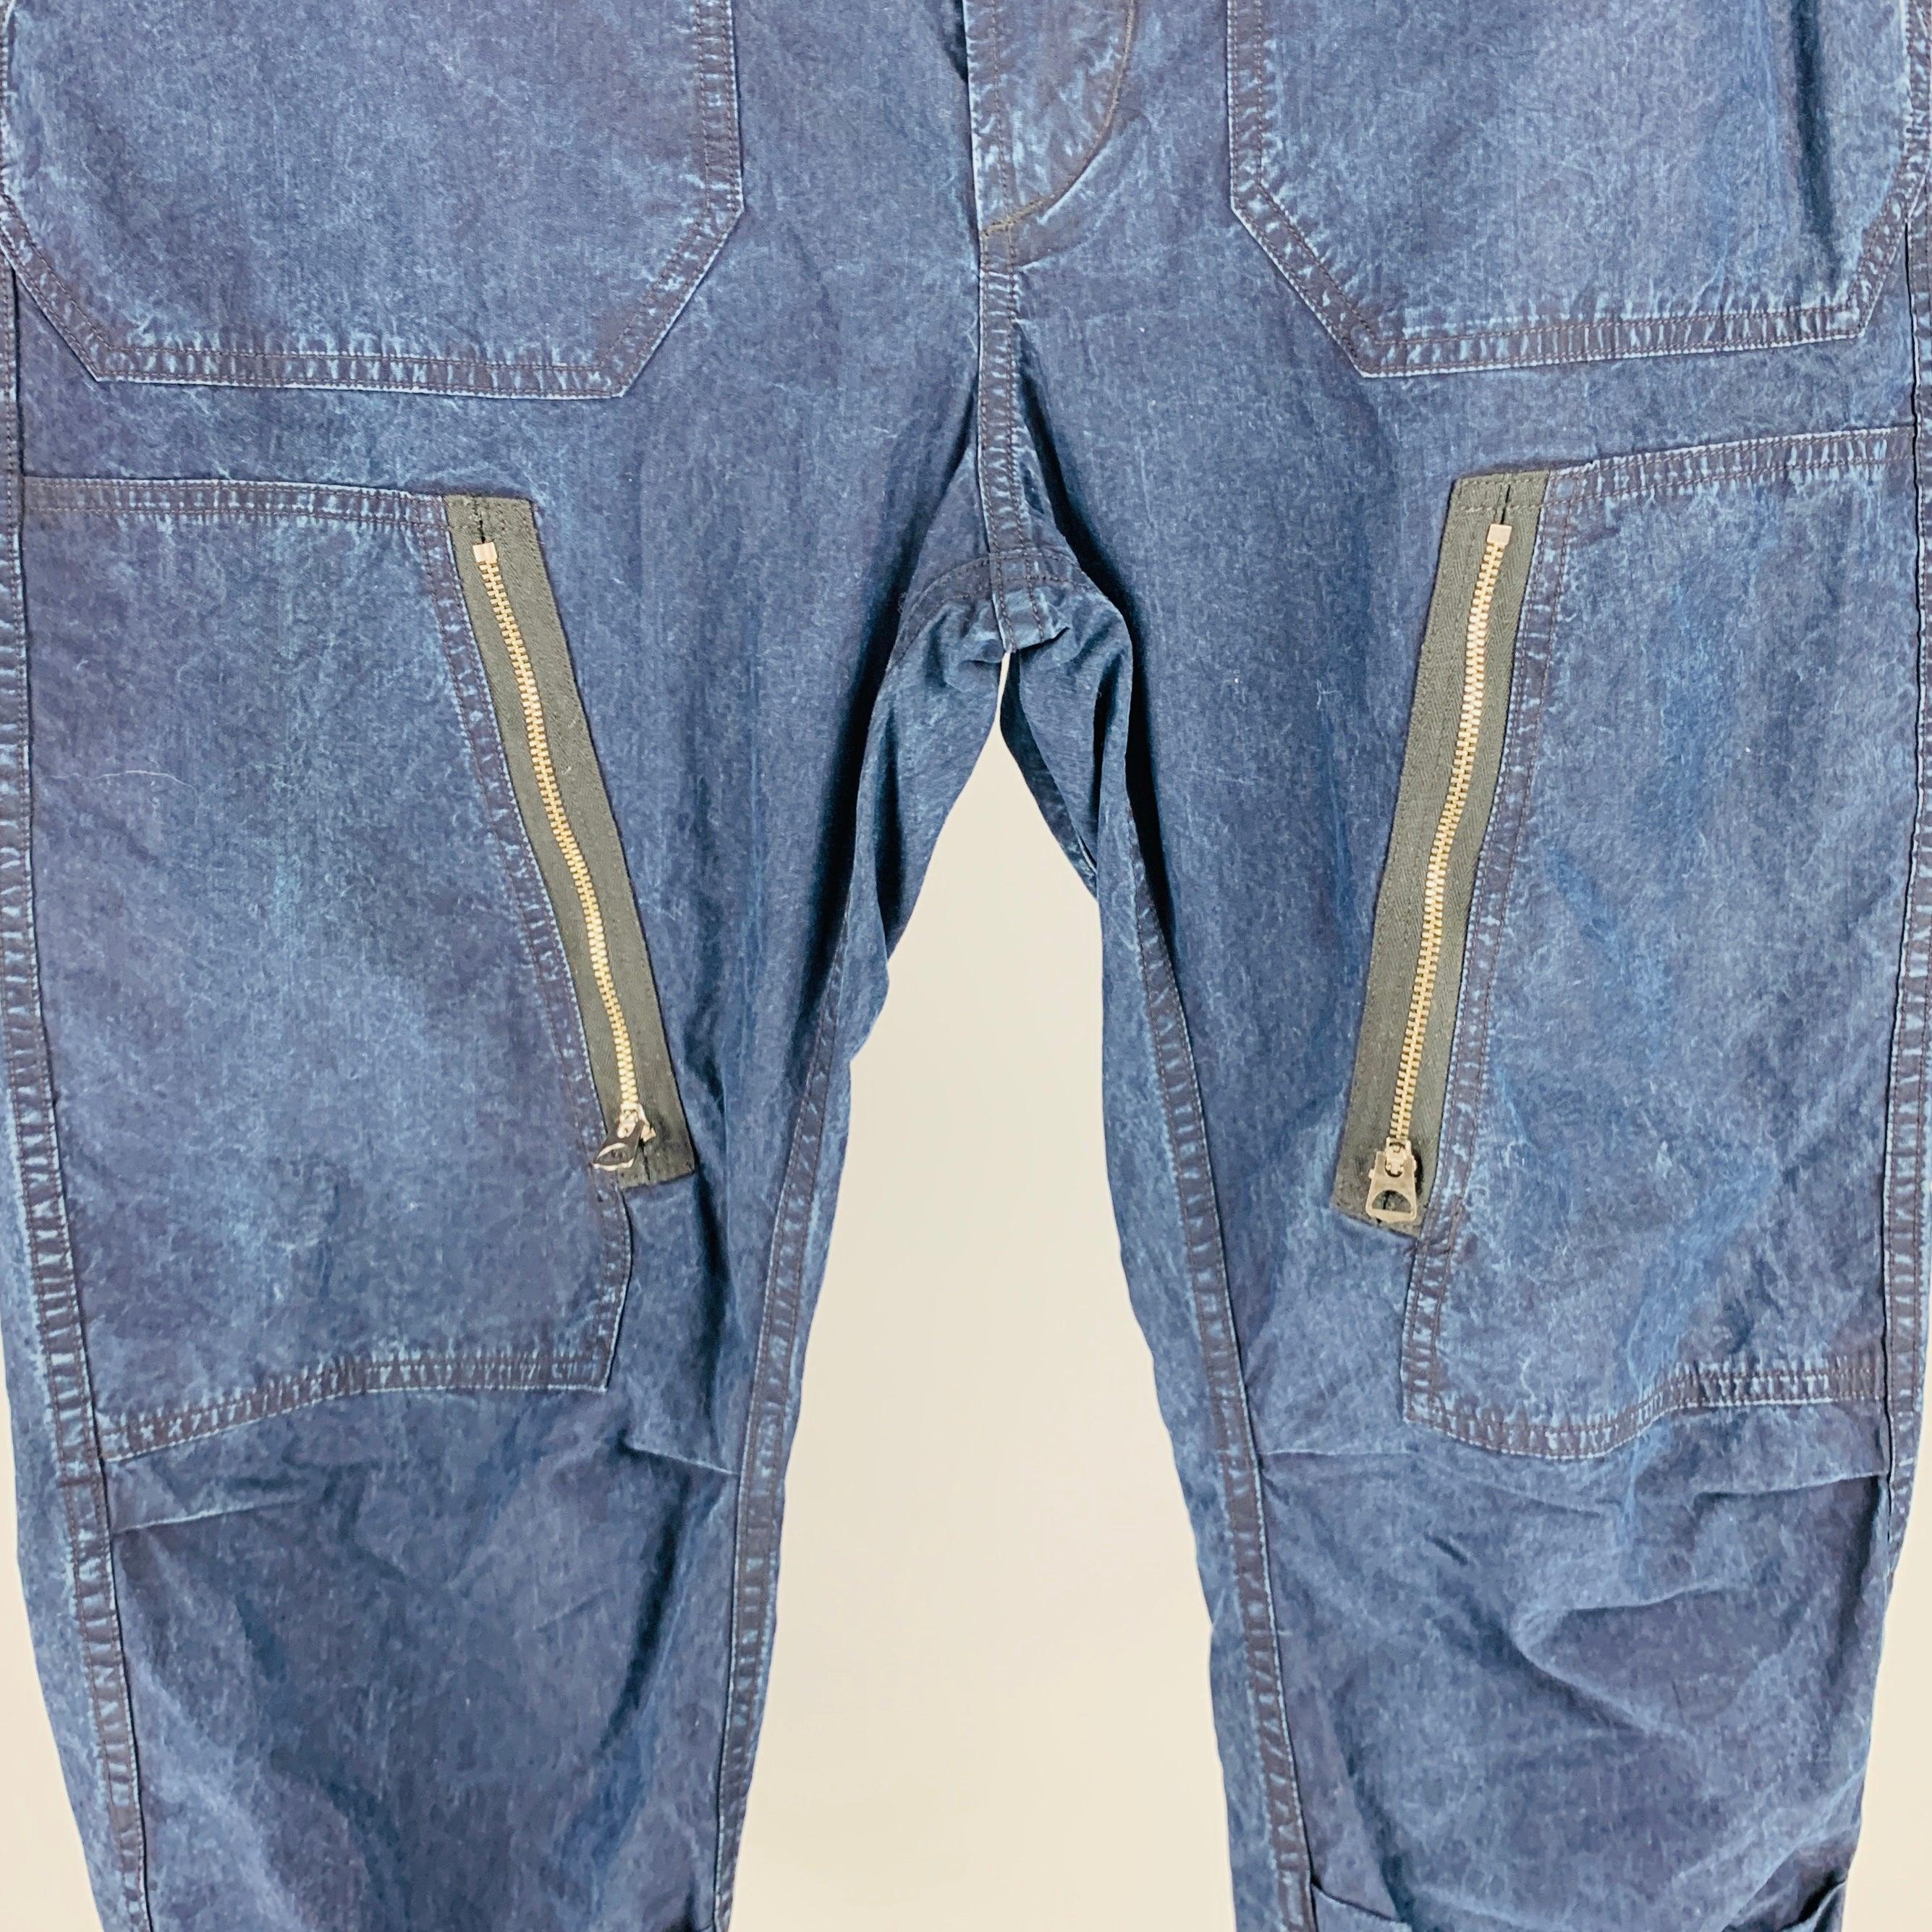 RRL by RALPH LAUREN casual pants
in an indigo wash lyocell blend fabric featuring zip pockets, drawstring cuffs, and zip fly closure. Excellent Pre-Owned Condition. 

Marked:   32 

Measurements: 
  Waist: 32 inches Rise: 11.5 inches Inseam: 29